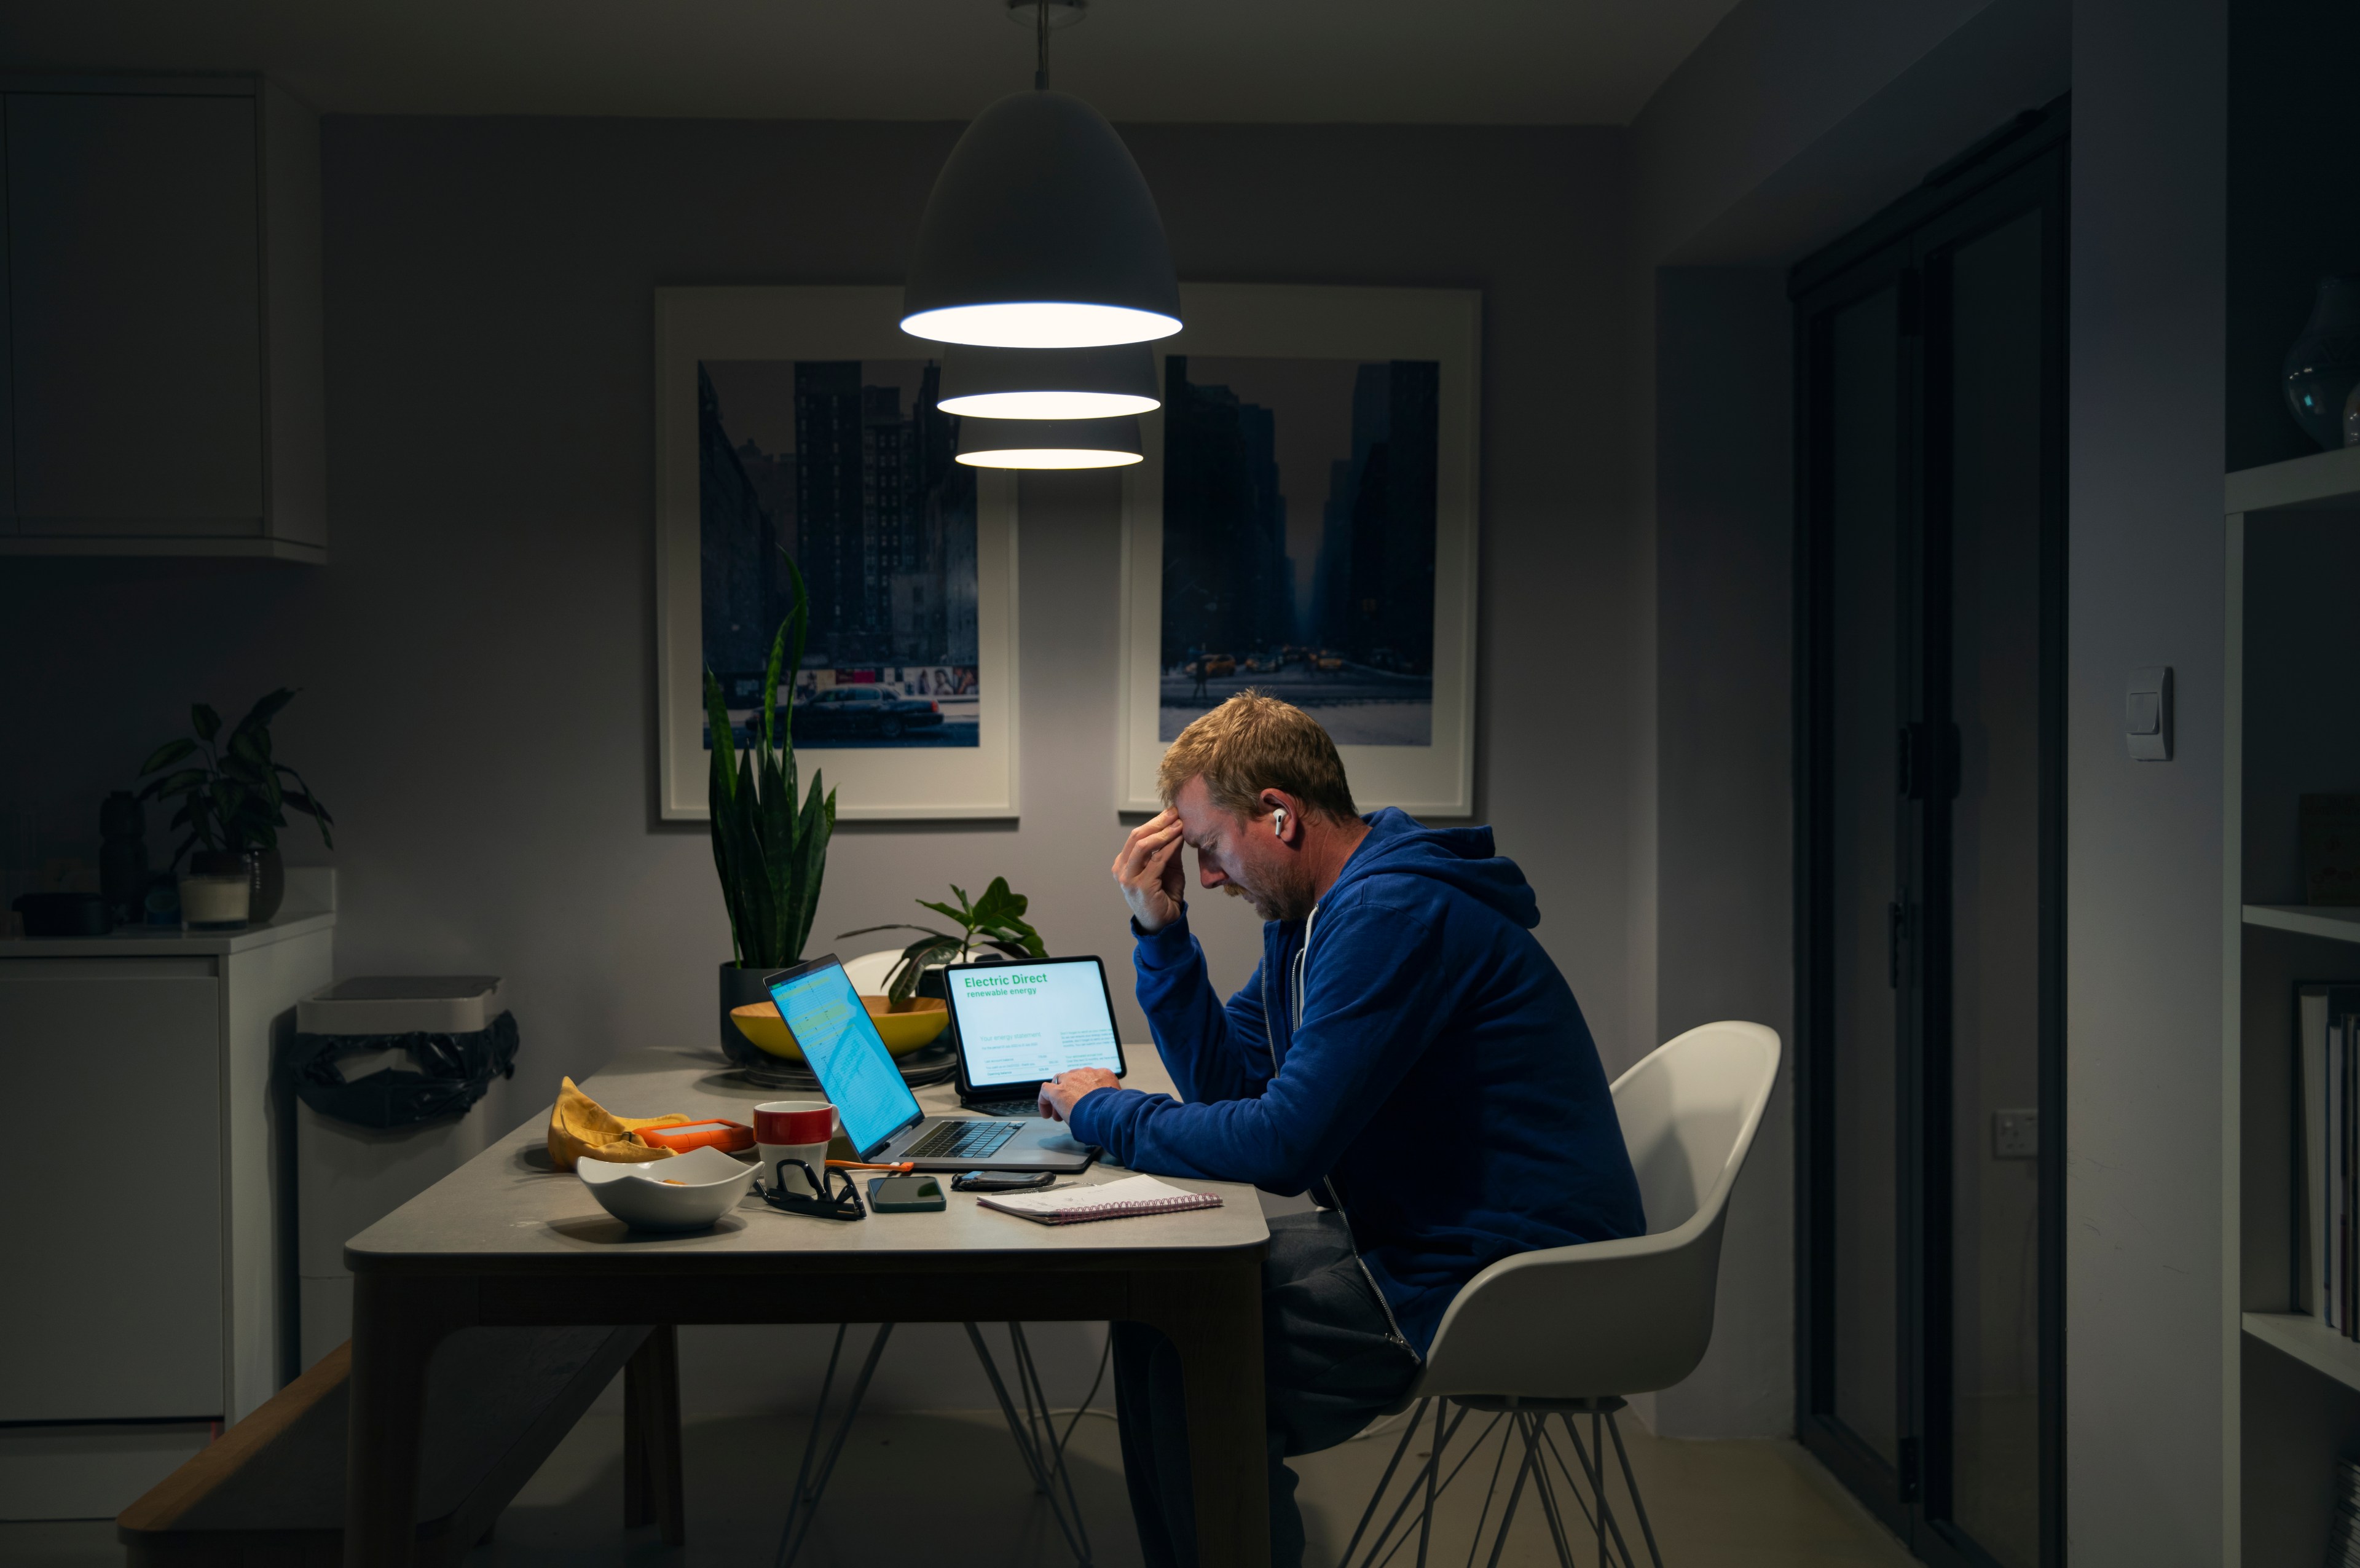 A person stressed at a home workspace at night, with a laptop, papers, and a lit lamp overhead.